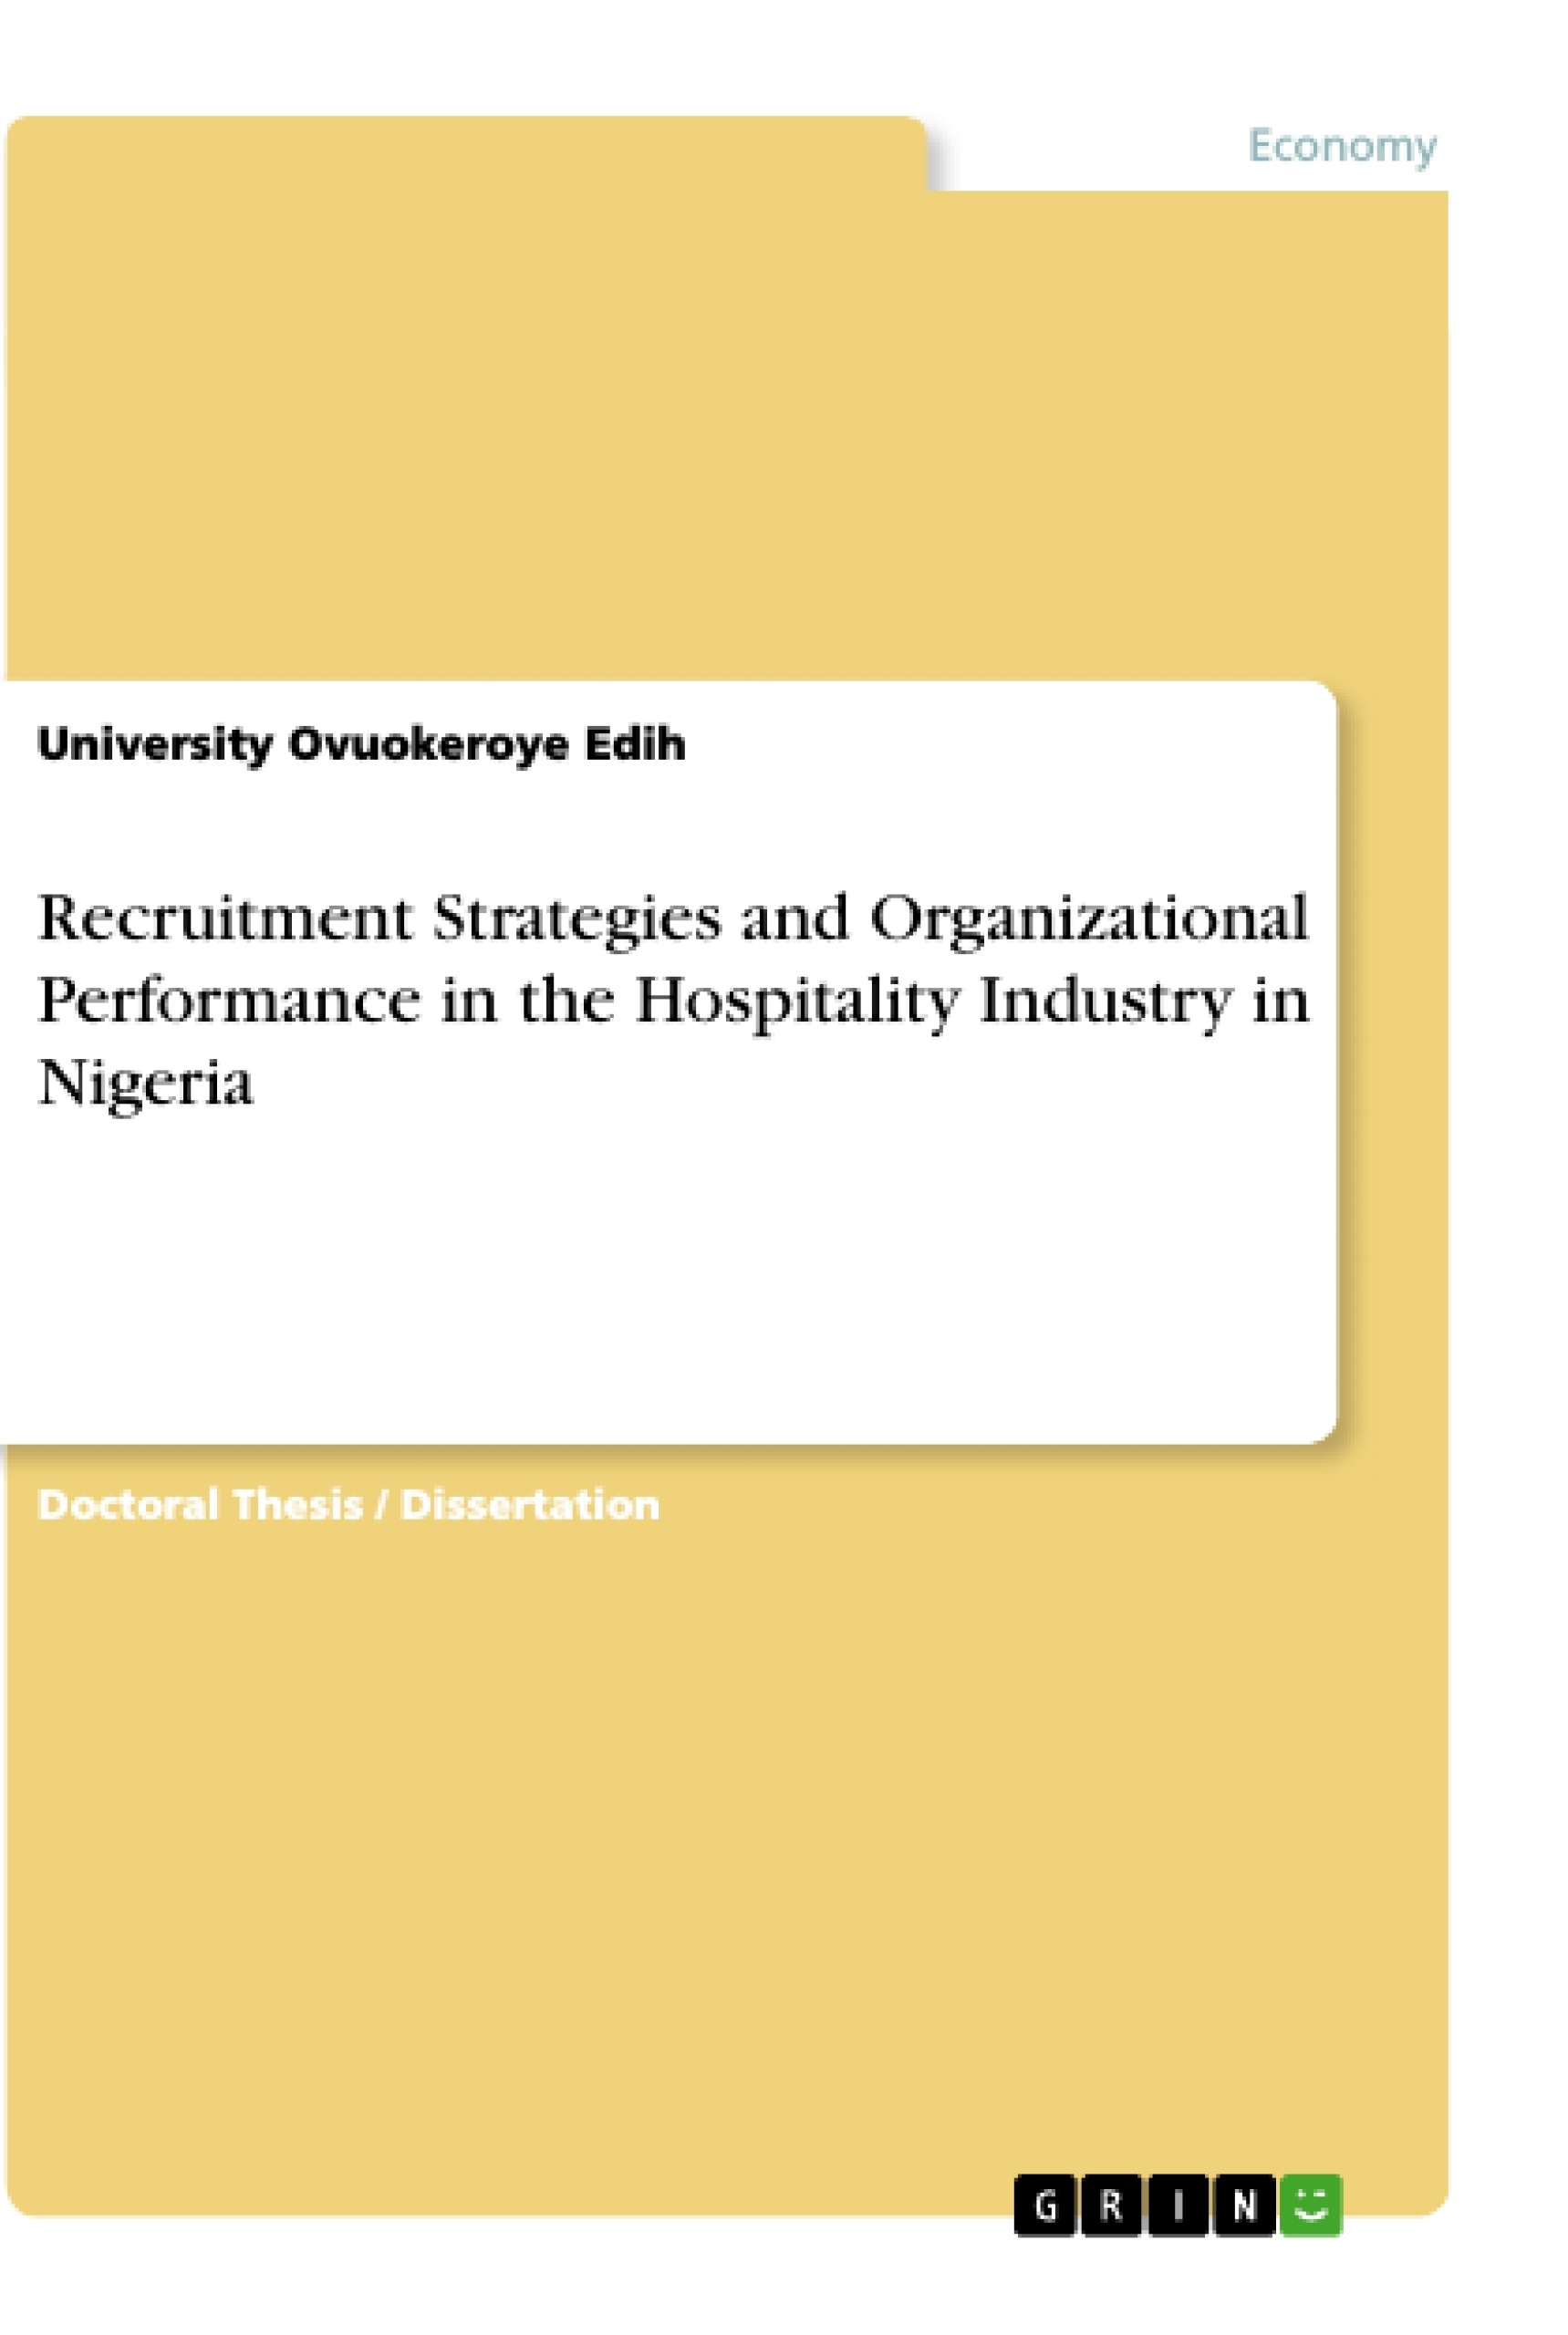 Title: Recruitment Strategies and Organizational Performance in the Hospitality Industry in Nigeria